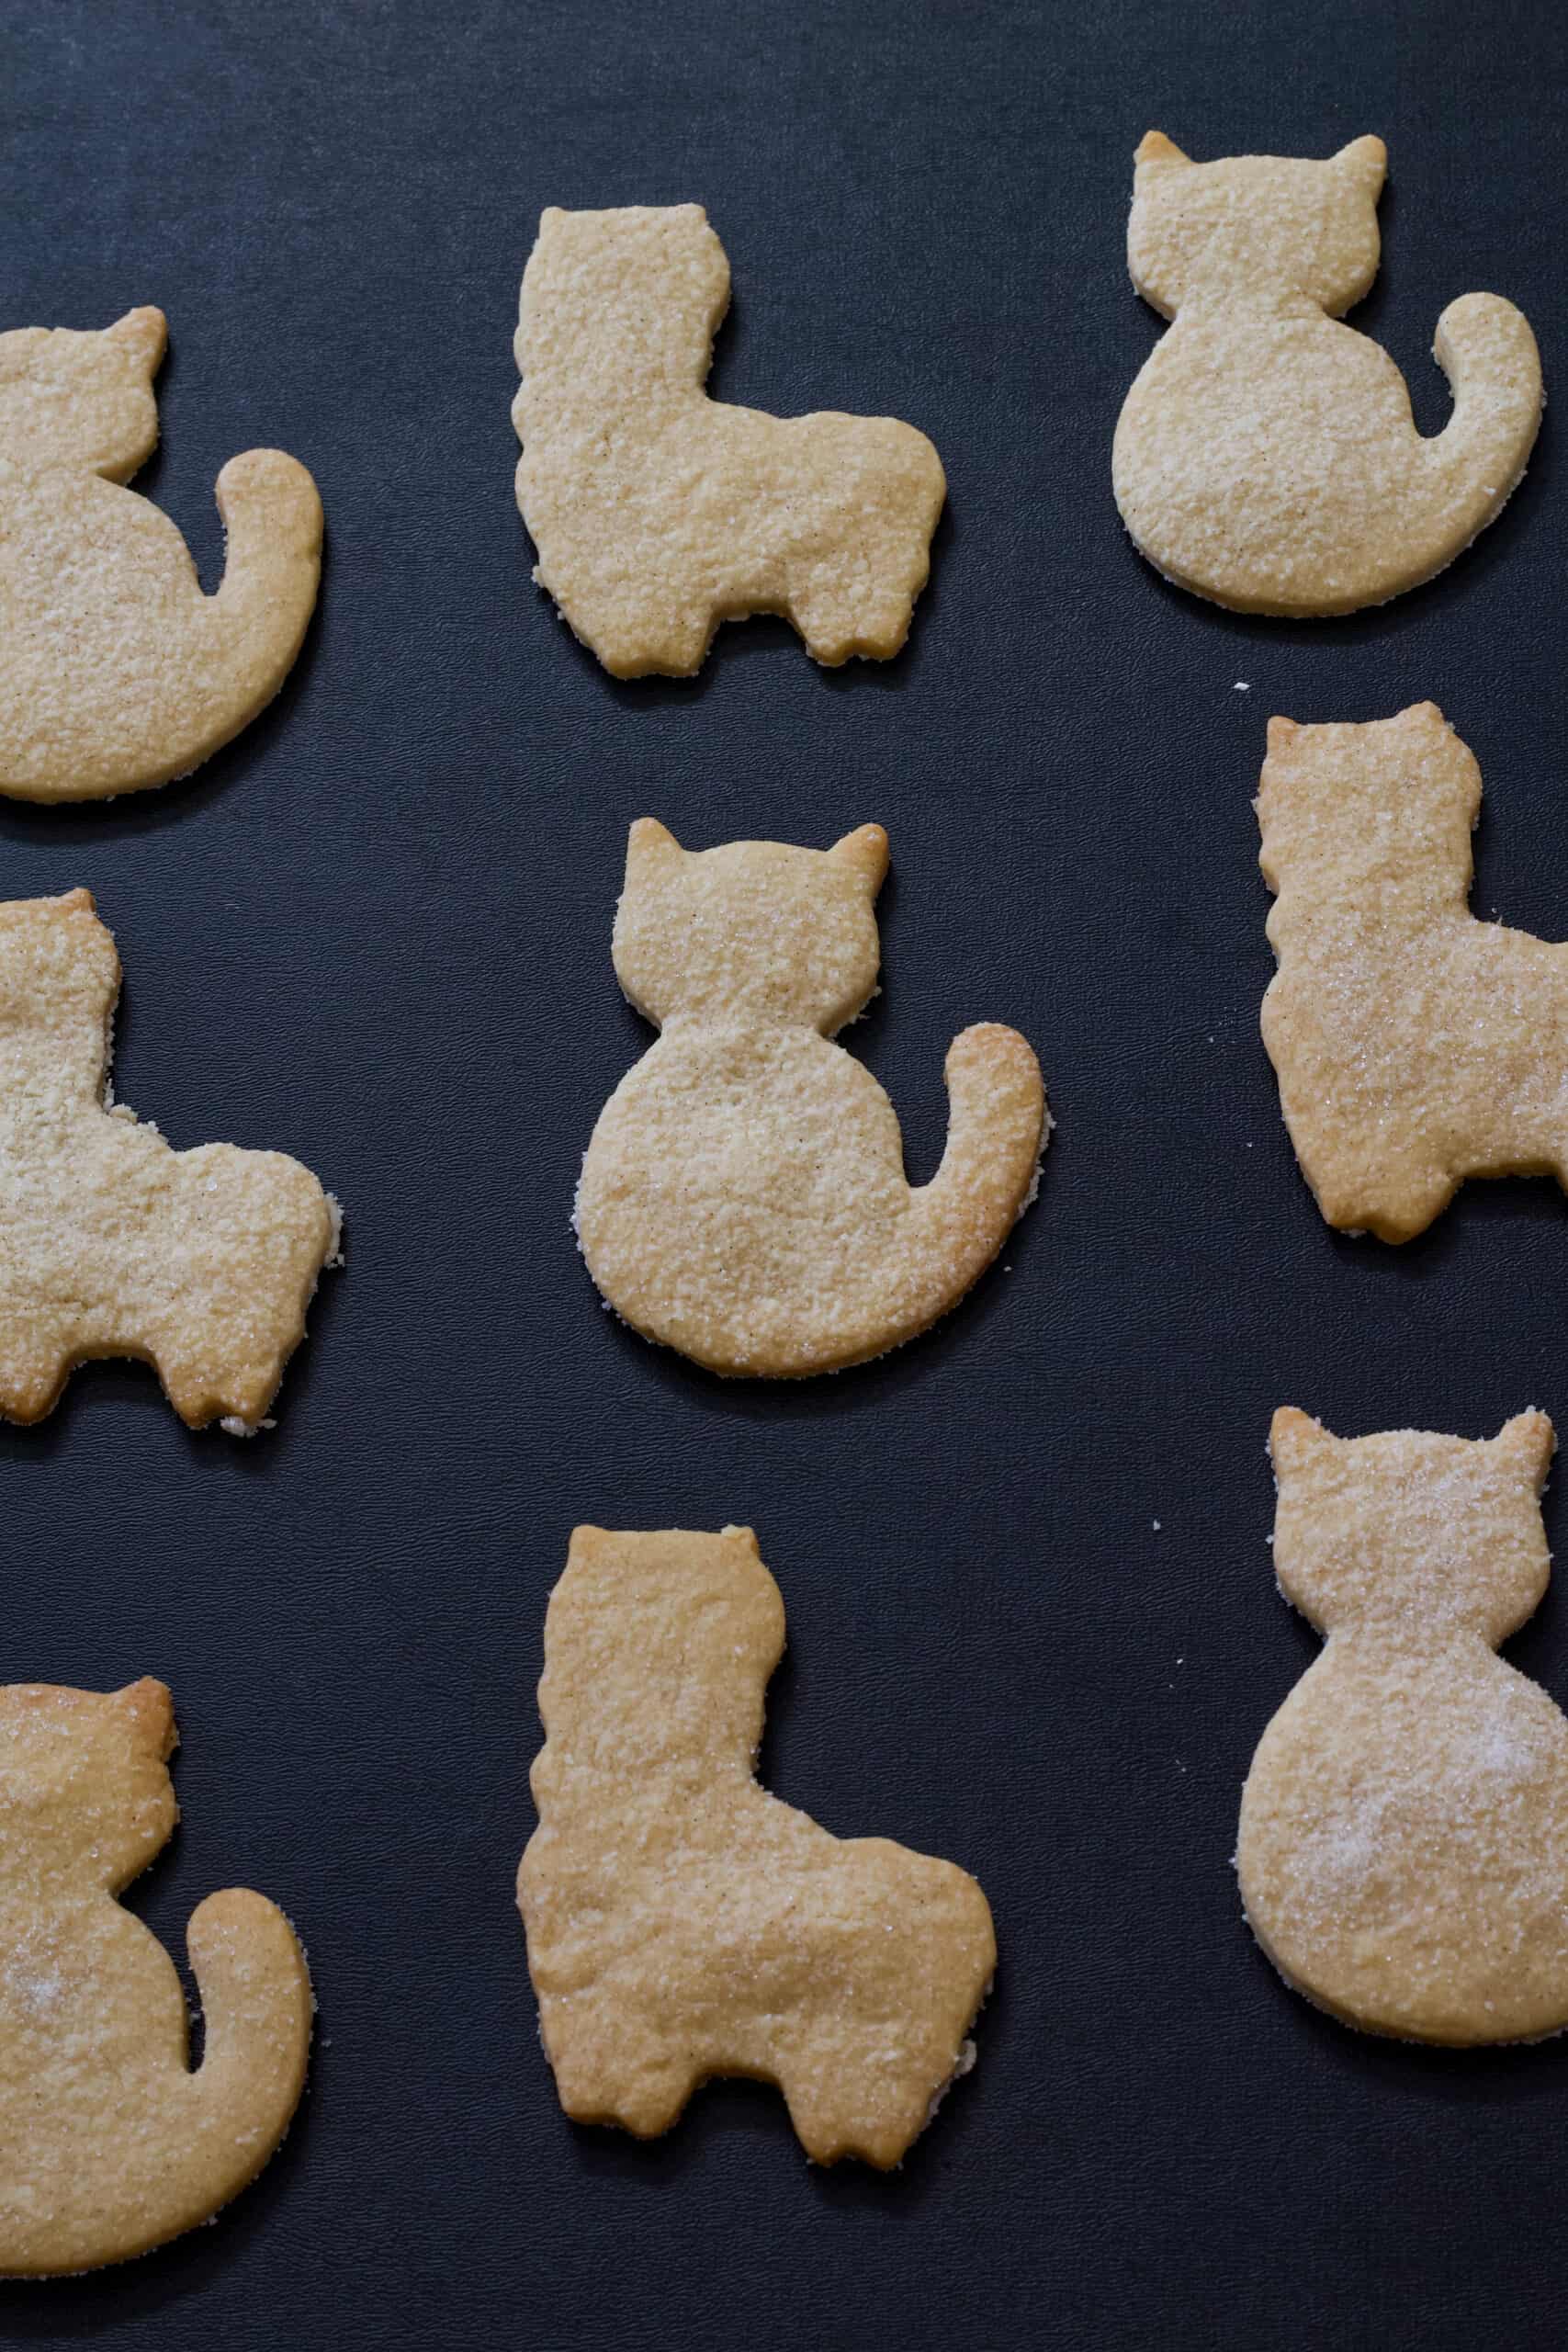 Several baked Mexican Cinnamon Sugar Cookies llama and cat cookies on a black background.